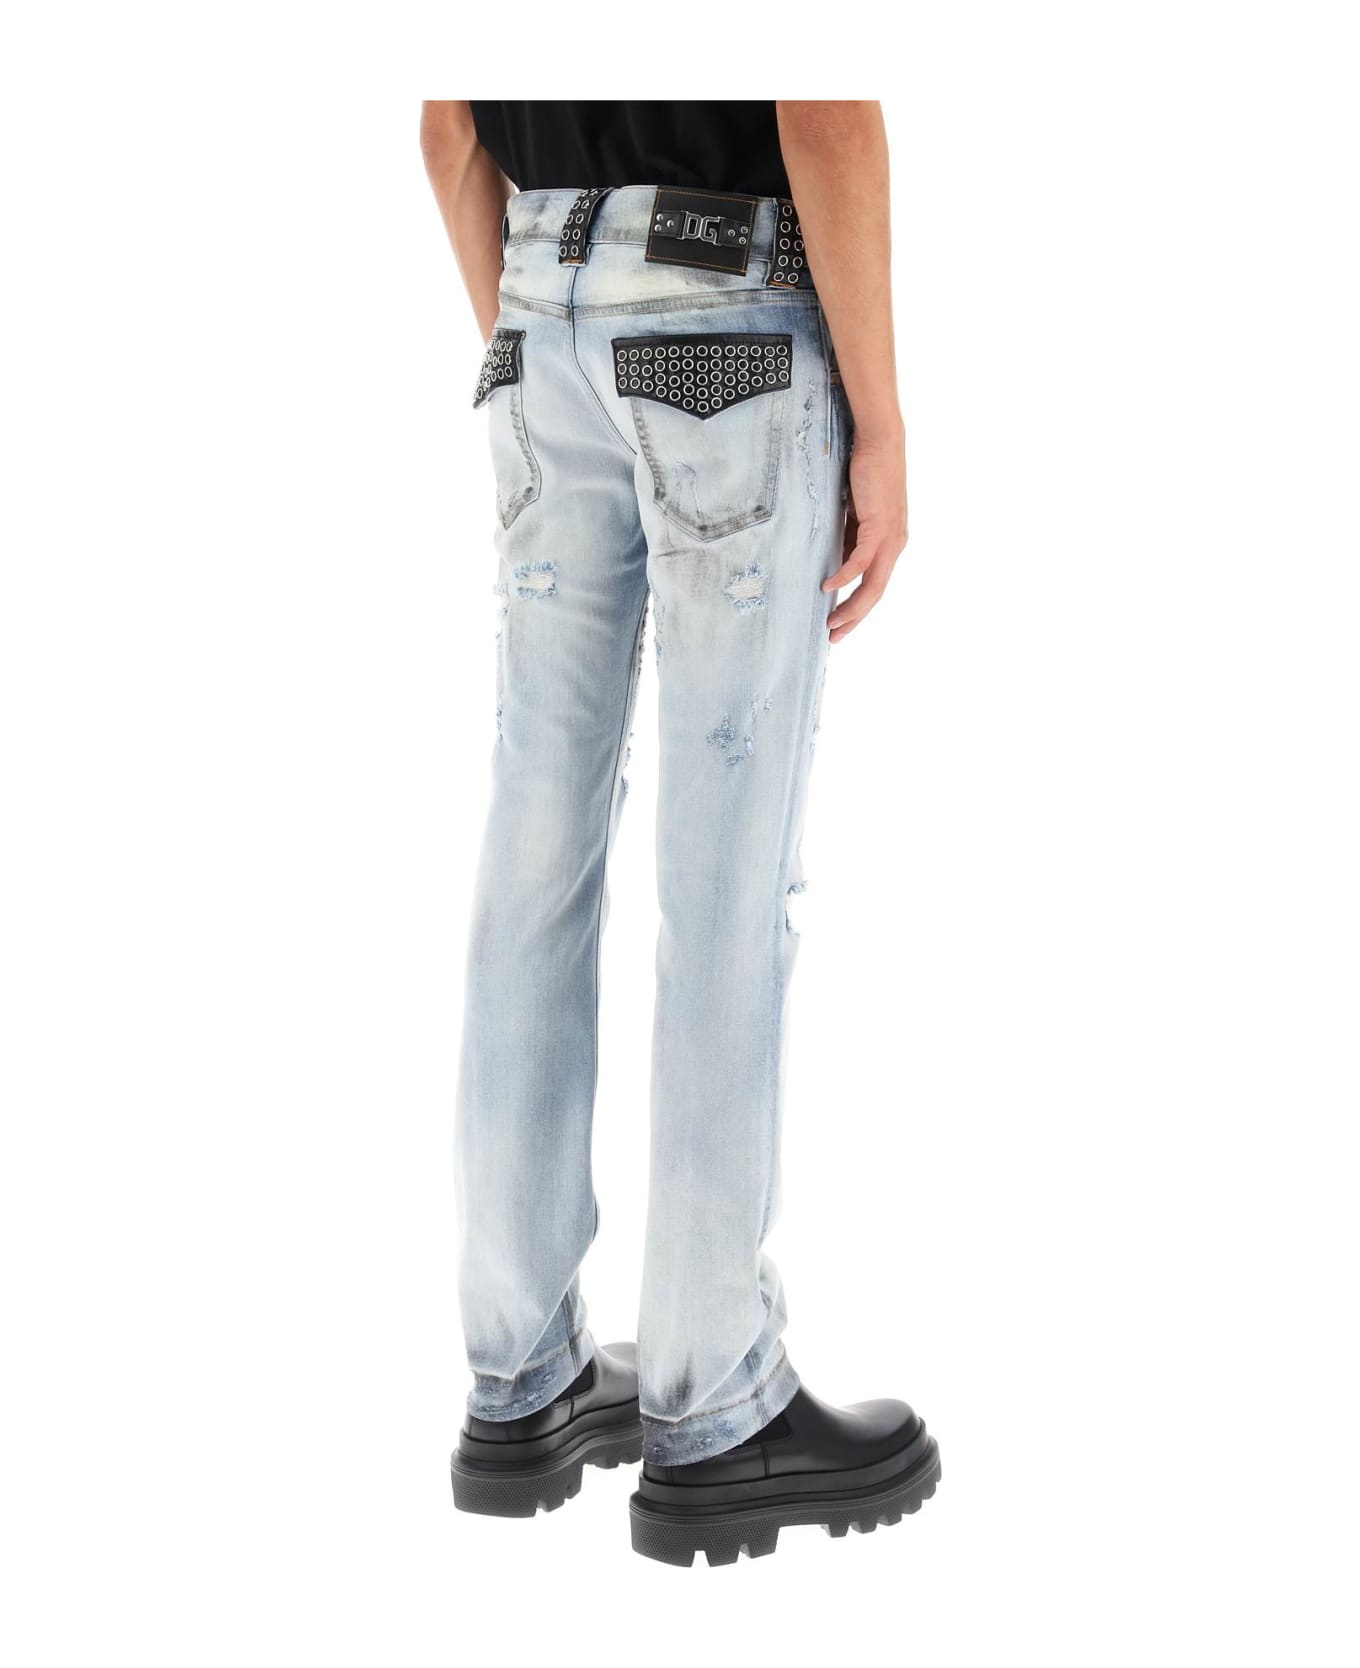 Dolce & Gabbana Re-edition Jeans With Leather Detailing - VARIANTE ABBINATA (Light blue)